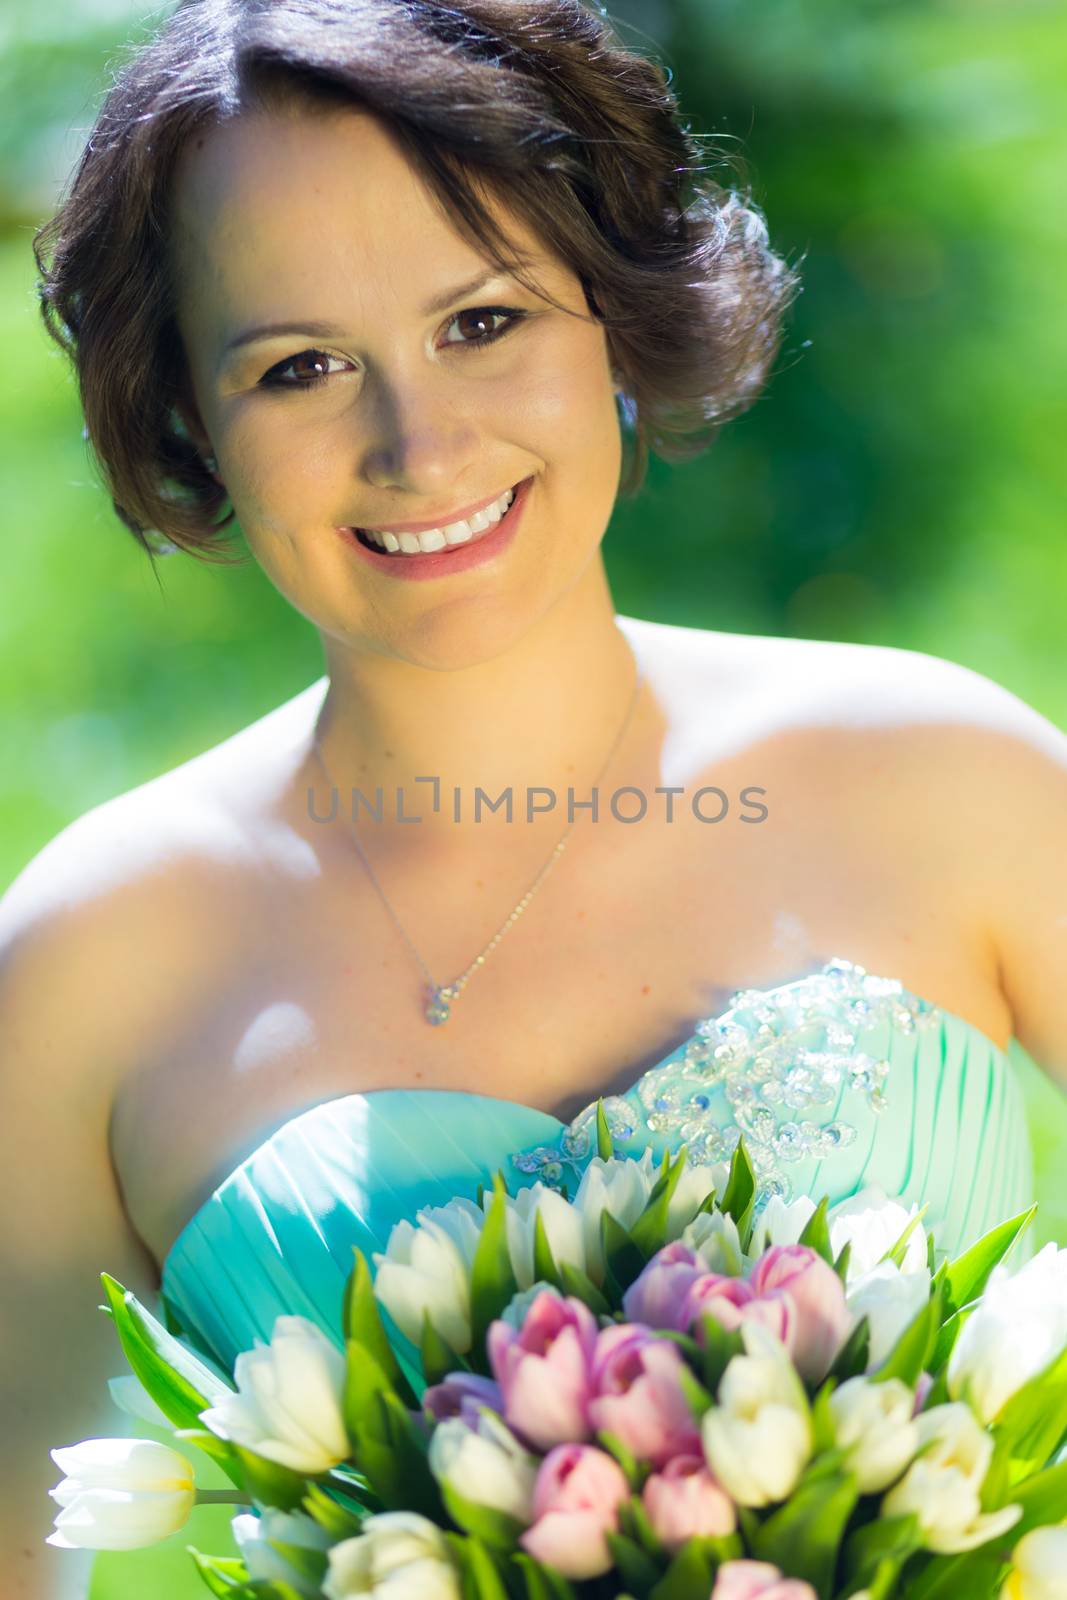 Portrait of a beautiful woman in green dress holding a colorful bouquet of tulips.